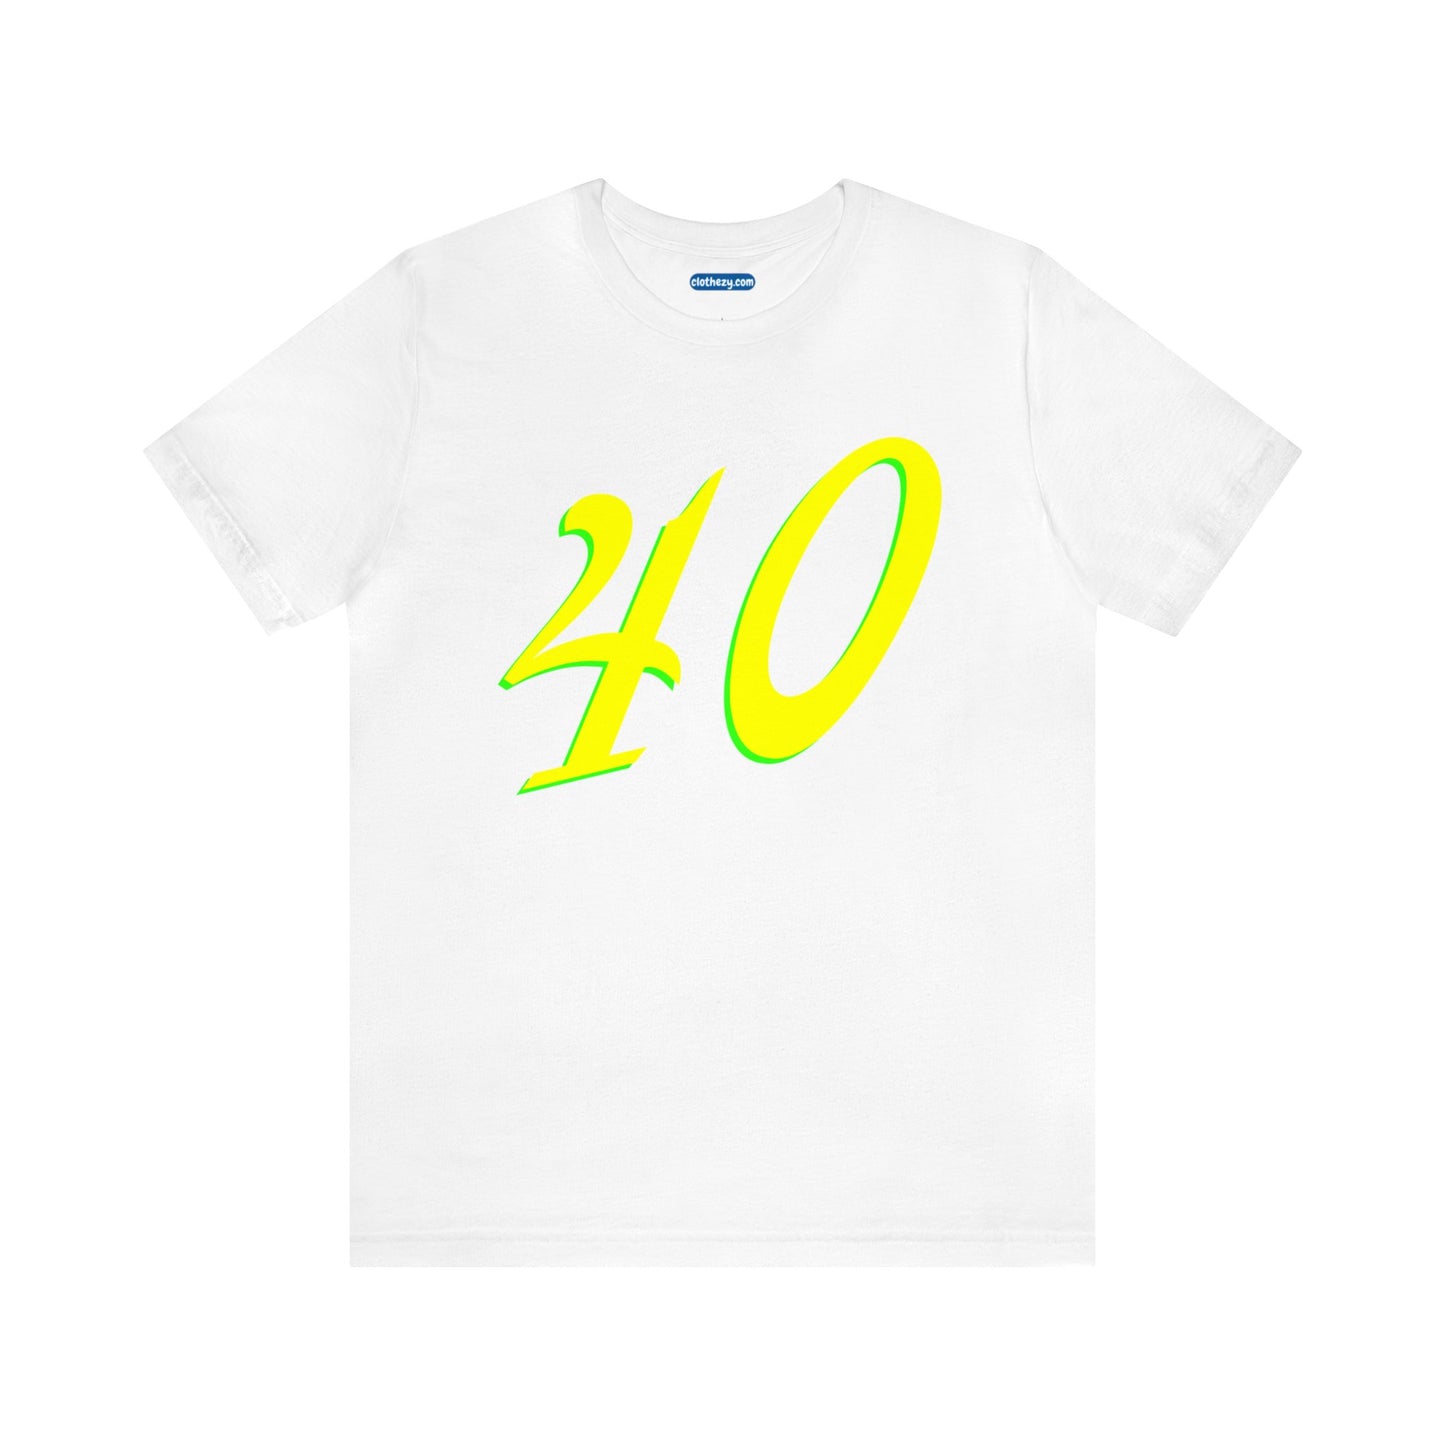 Number 40 Design - Soft Cotton Tee for birthdays and celebrations, Gift for friends and family, Multiple Options by clothezy.com in White Size Small - Buy Now